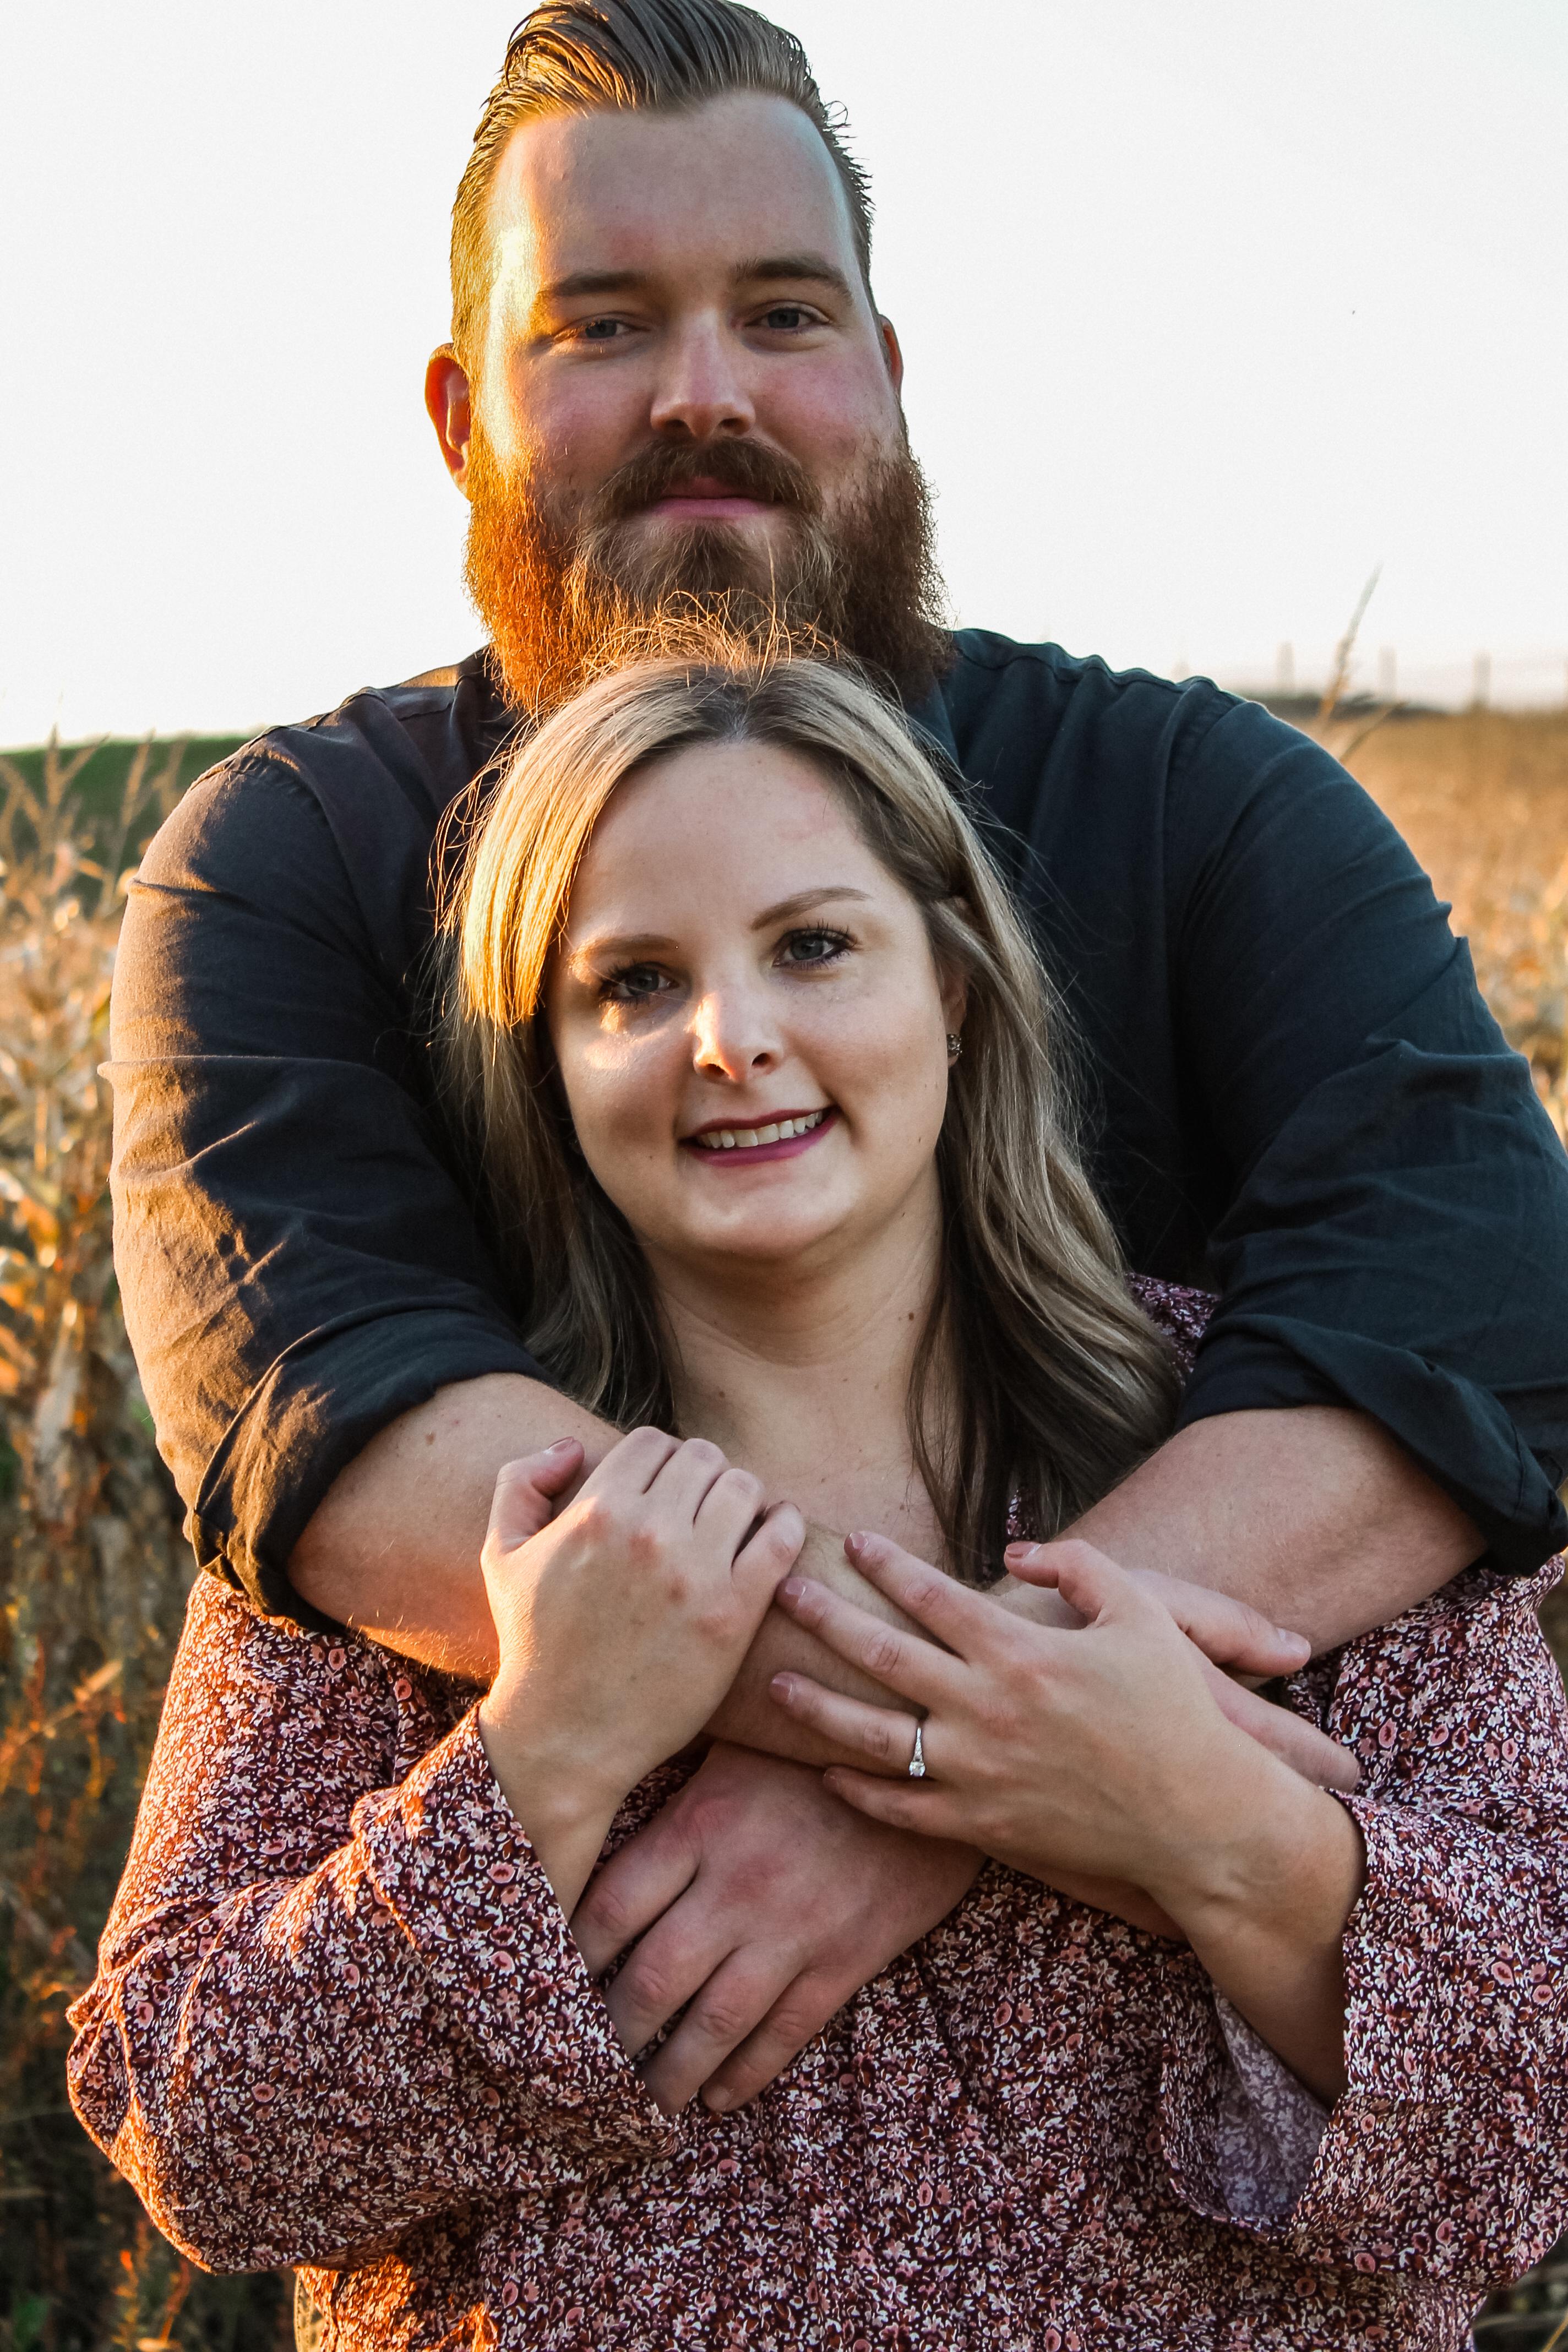 The Wedding Website of Carly Sandstrom and Stephen Pugh